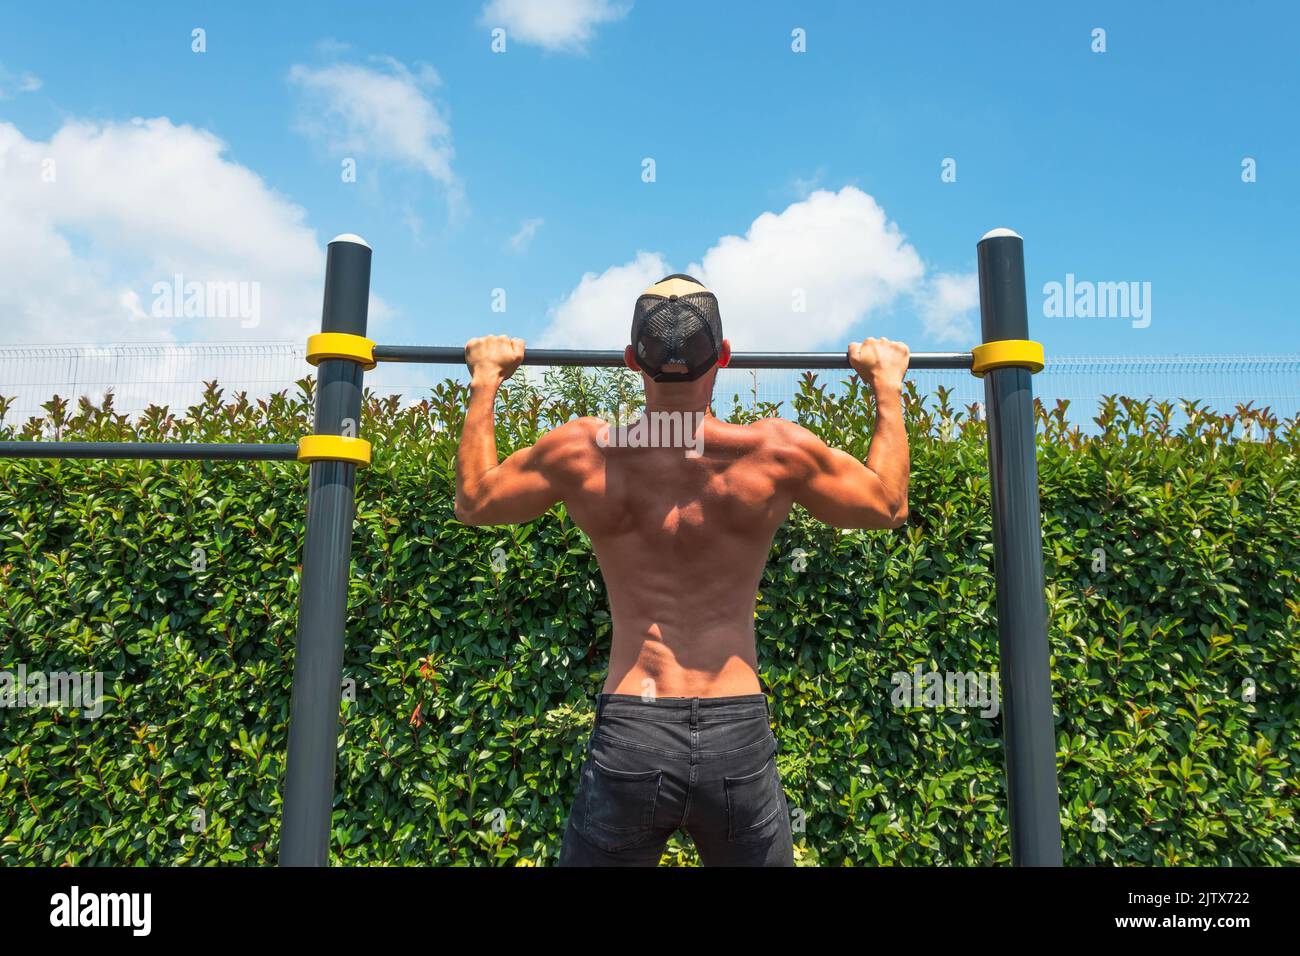 Muscular man in a cap doing pull-ups on the horizontal bar in the park outdoors, back view of his back Stock Photo